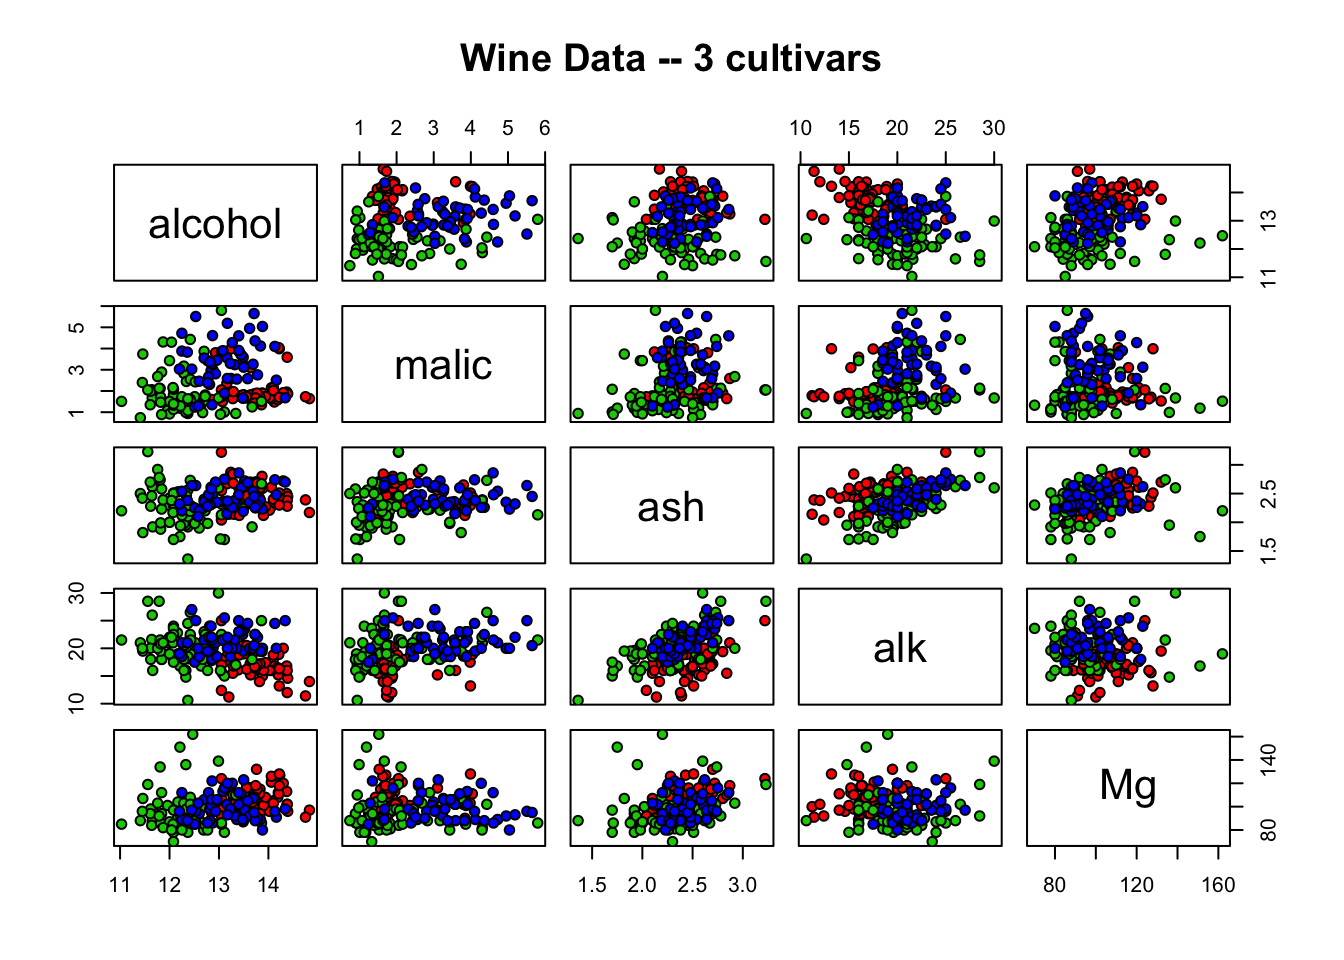 Scatterplot matrix demonstrating the relationships between five variables for three wine cultivars. Alcohol, malic acid (malic), ash, alkalinity of ash (alk), and magnesium (Mg) are plotted together on both x and y axes for cultivar 1 (red), cultivar 2 (green), and cultivar 3 (blue). Groupings demonstrate association between variables.